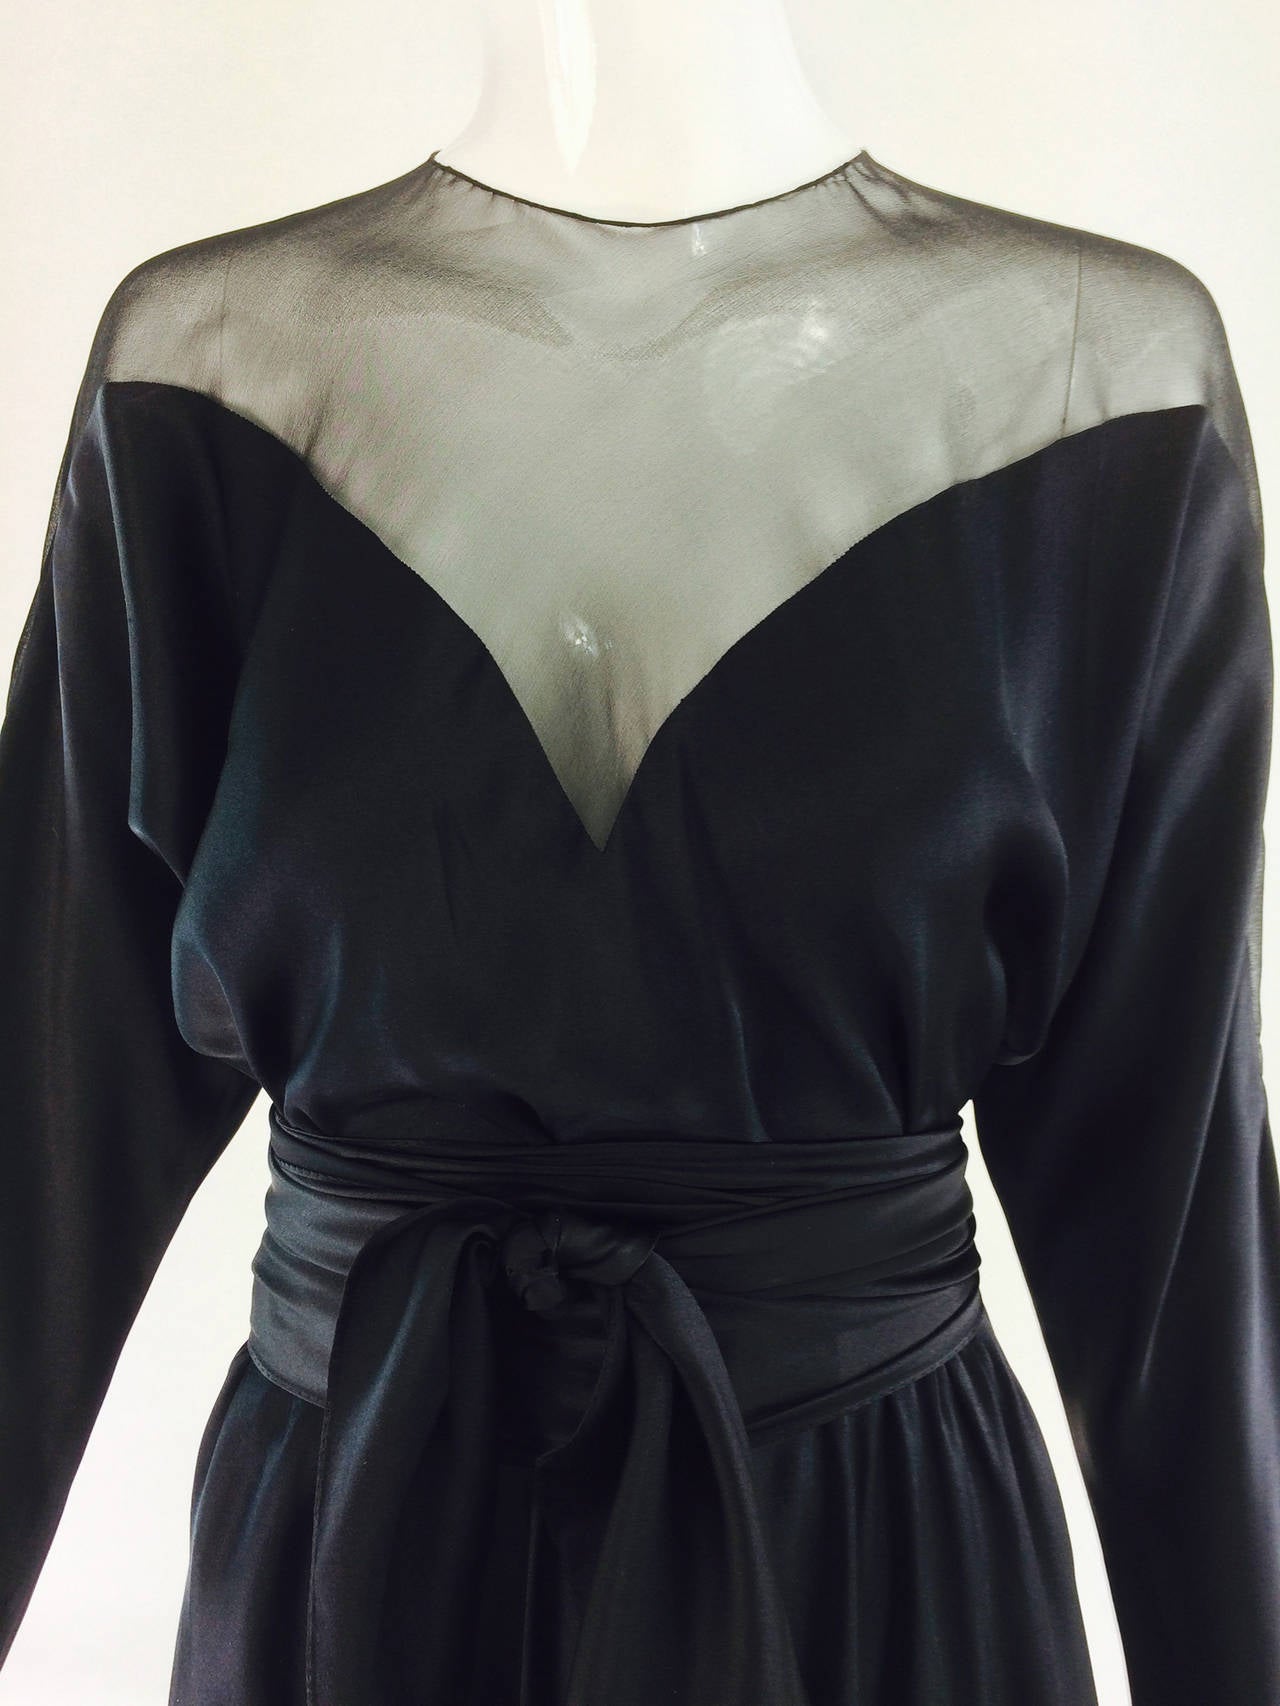 Halston black silk and chiffon silk bias cut cocktail dress cocktail dress from the 1970s. A similar dress was worn by Liza Minnelli in Halston's 1971 made to order show. I love the way this dress fits the body, skimming and clinging in all the